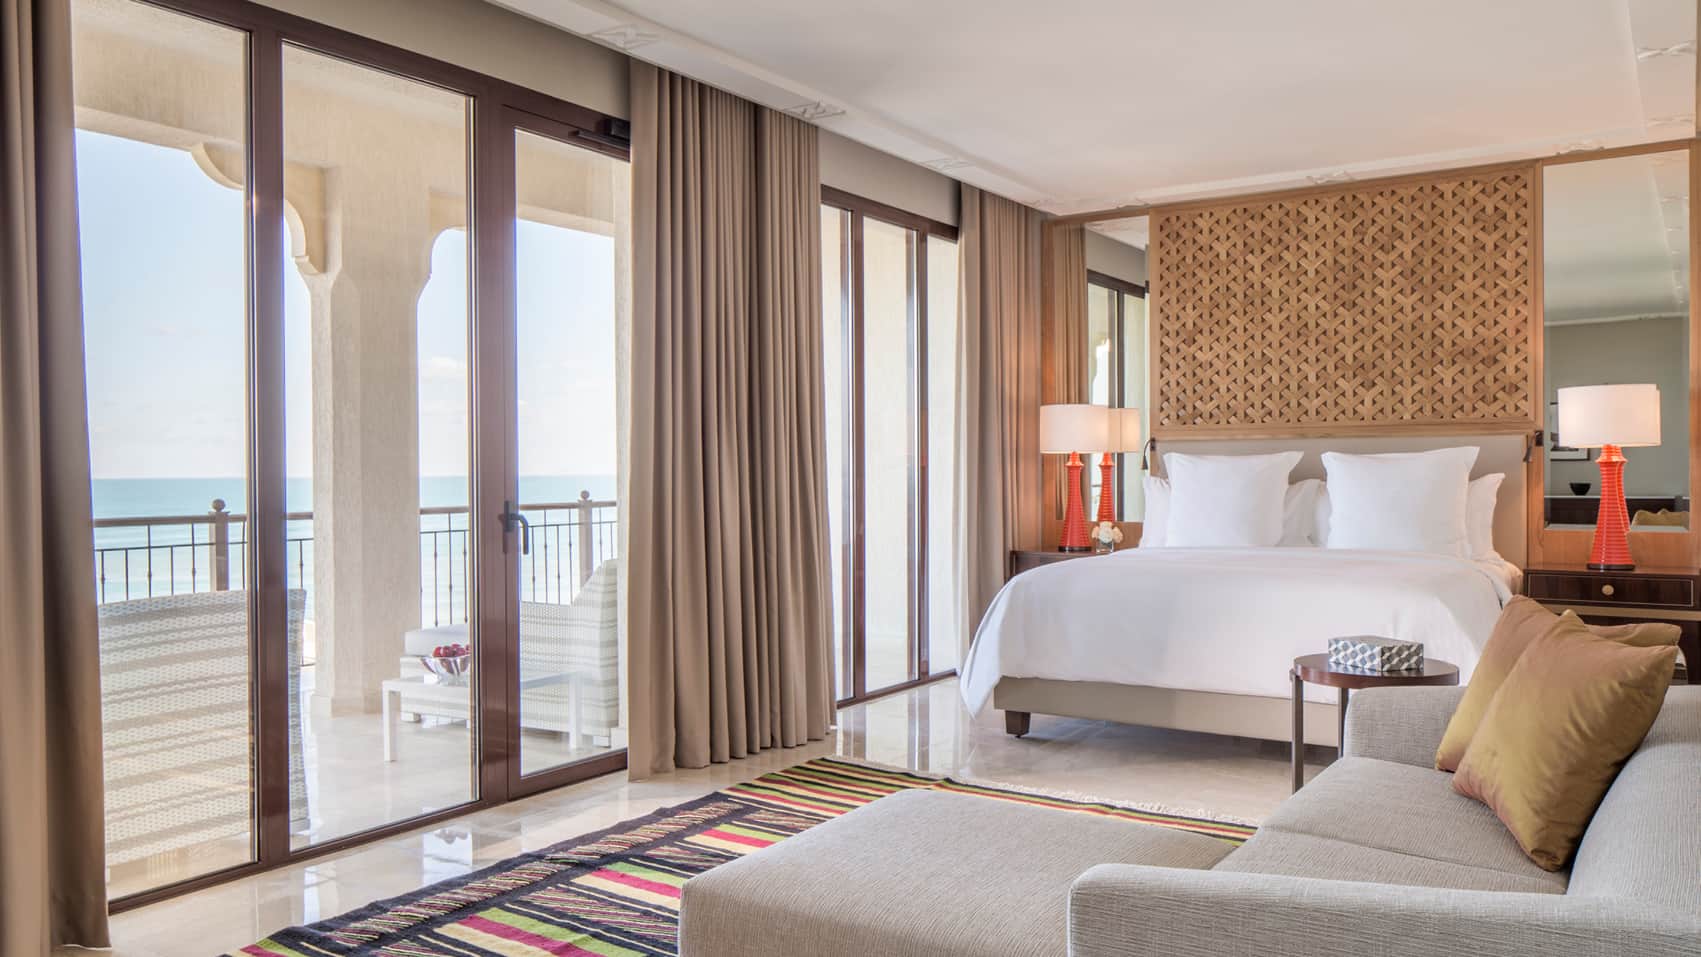 Four Seasons Hotel Tunis-Gamarth Updated 2023 Room Price-Reviews & Deals |  Trip.com